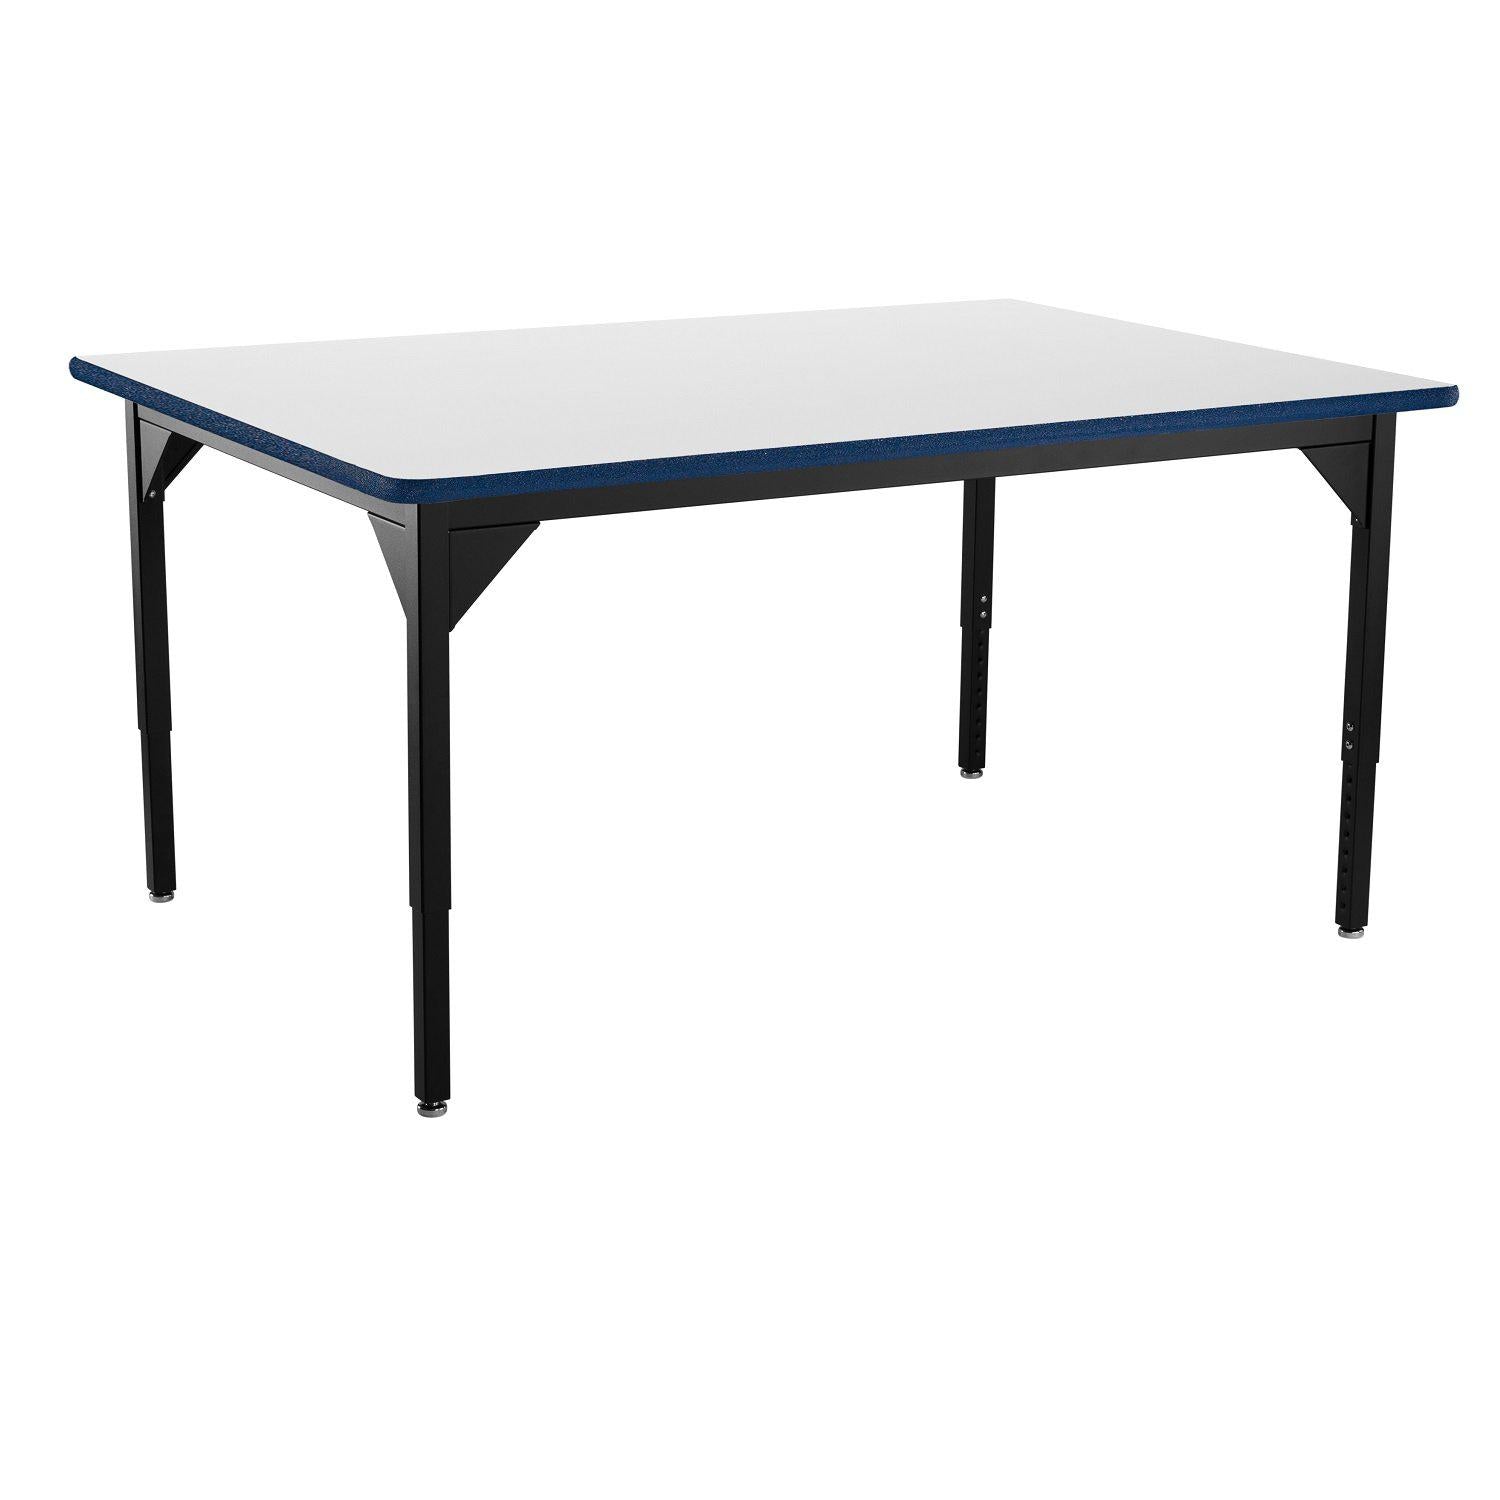 Heavy-Duty Height-Adjustable Utility Table, Black Frame, 48" x 60", Supreme High-Pressure Laminate Top with Black ProtectEdge